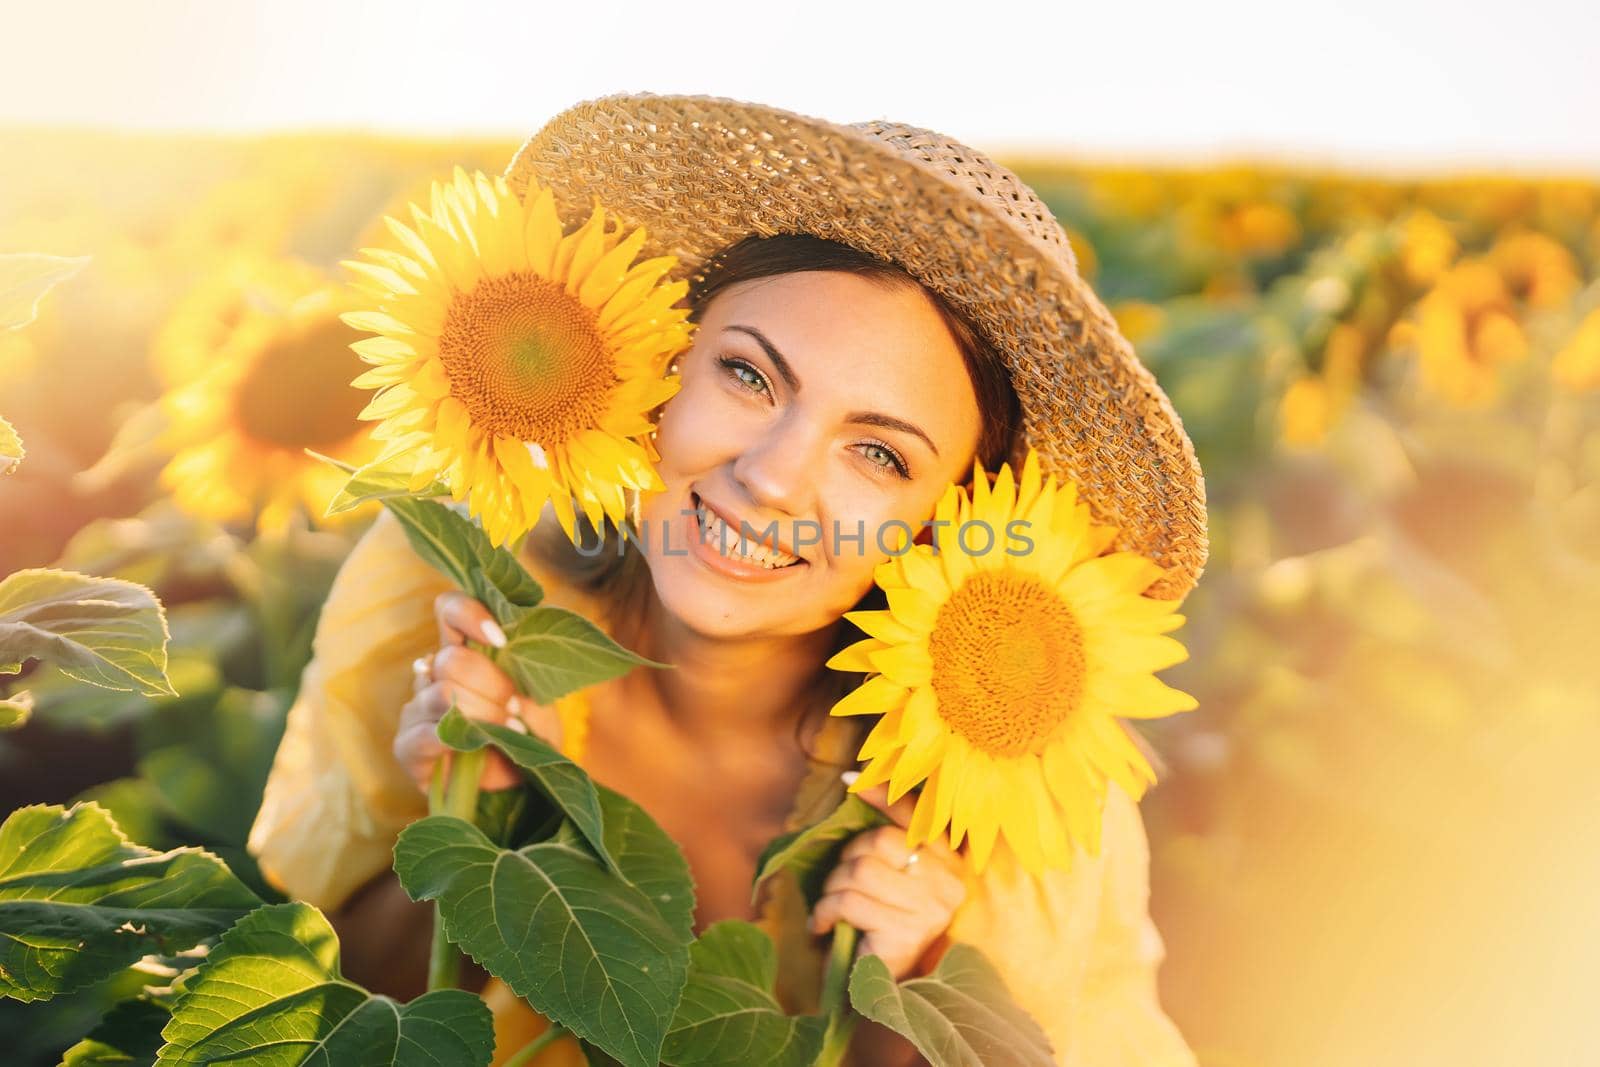 Beautiful young woman in straw hat posing with sunflowers. Blooming field. Happy smiling girl. Trendy outfit, vintage retro style. High quality photo